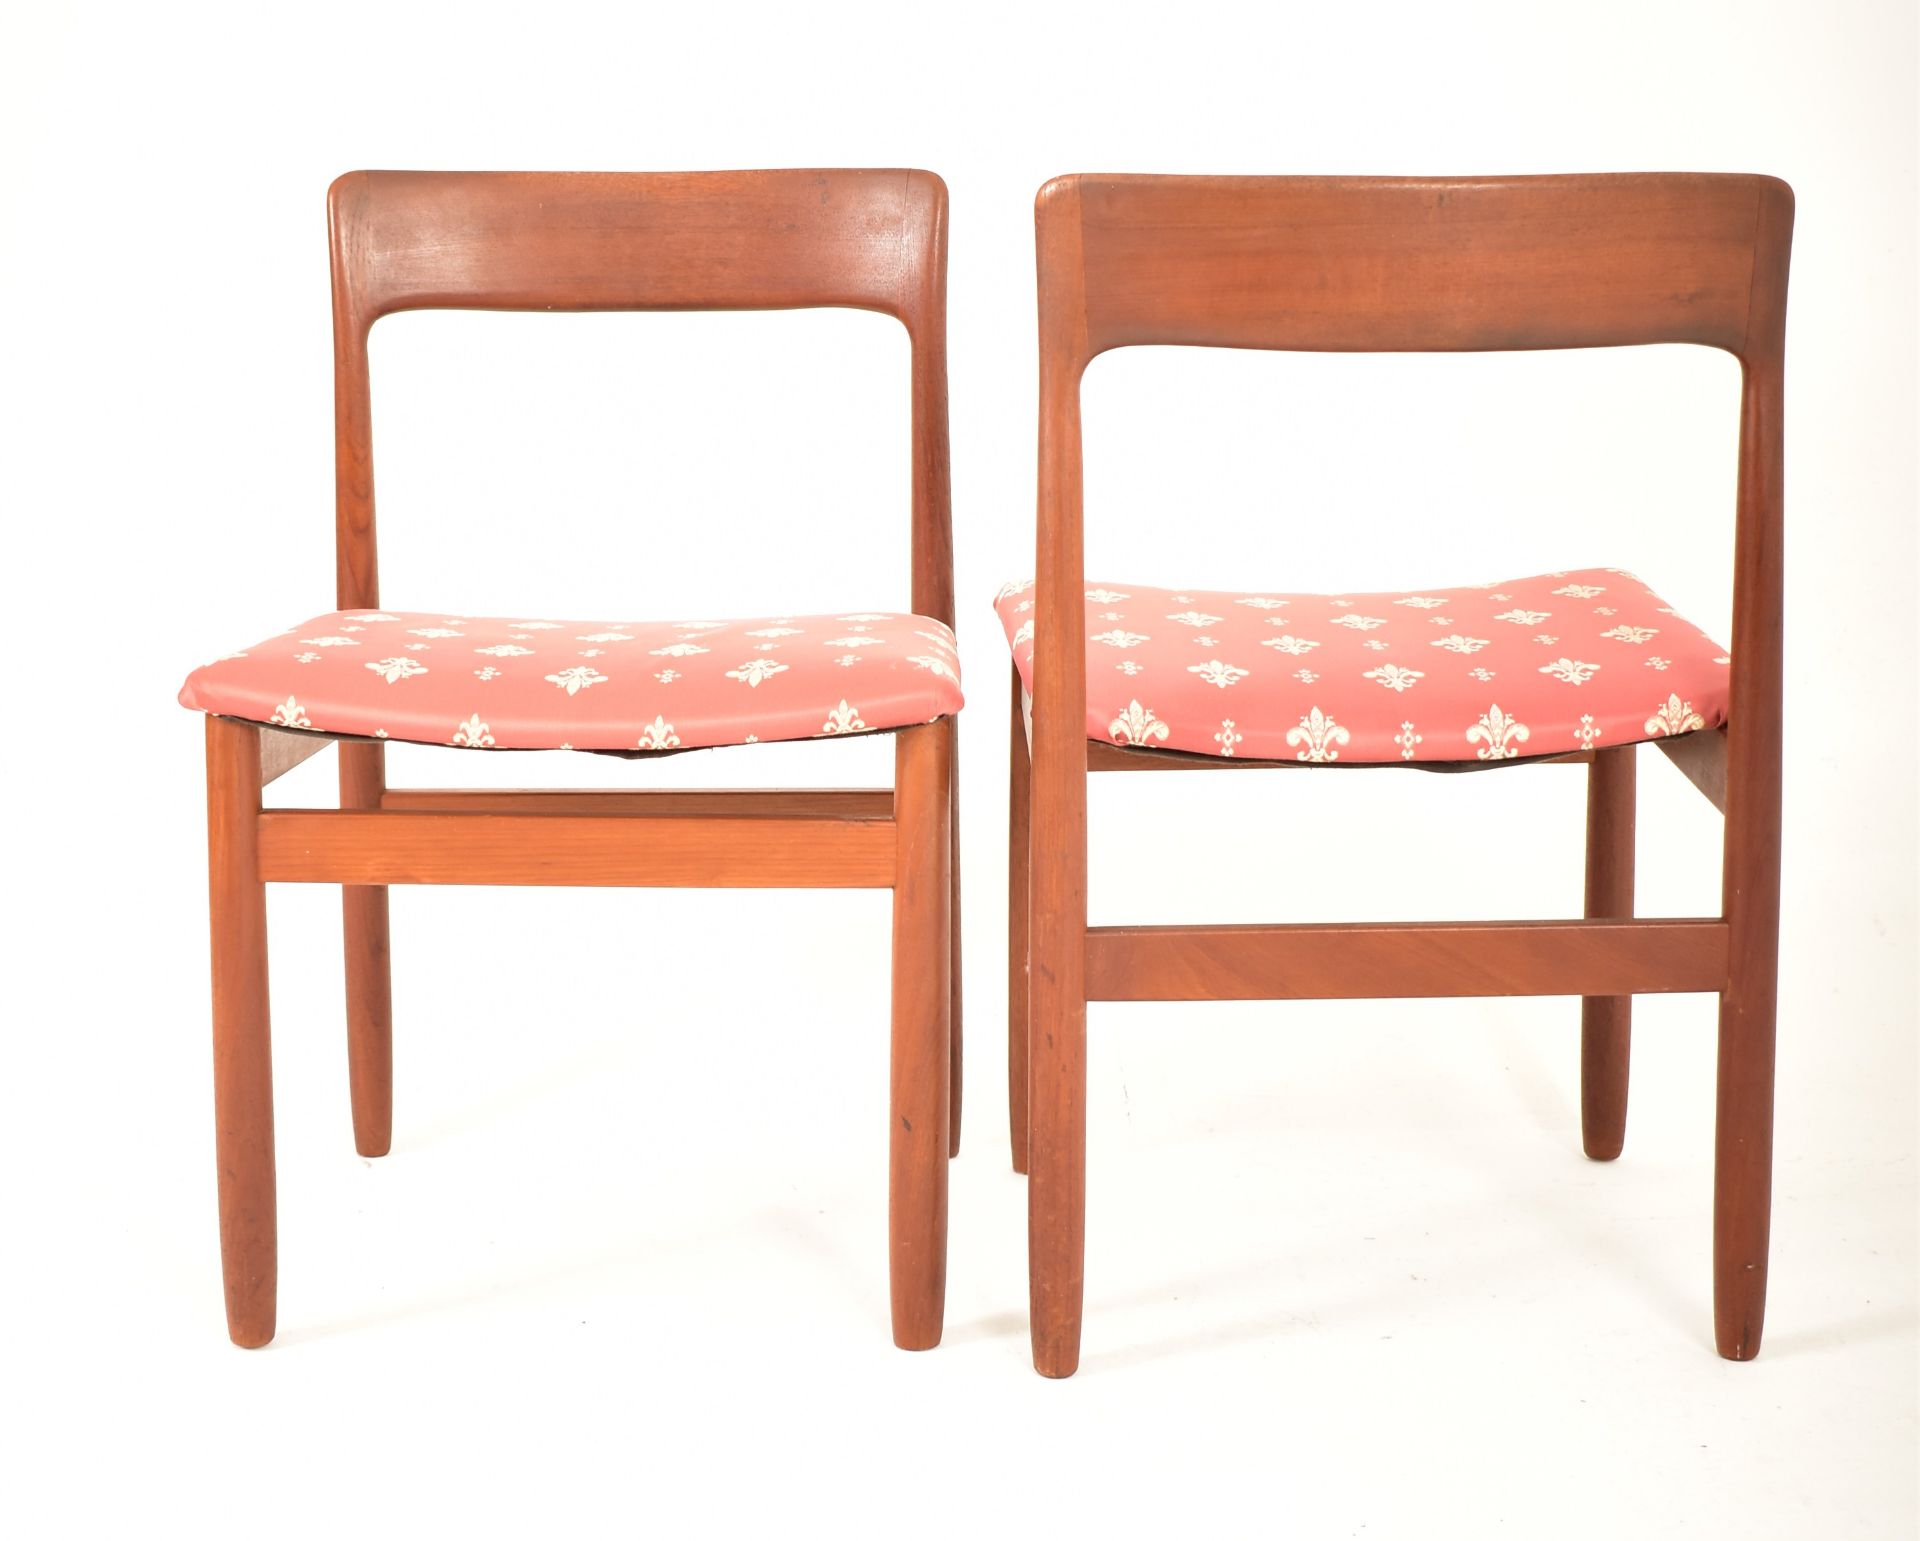 YOUNGERS - MID CENTURY 1960S TEAK DINING TABLE AND CHAIRS - Image 6 of 9